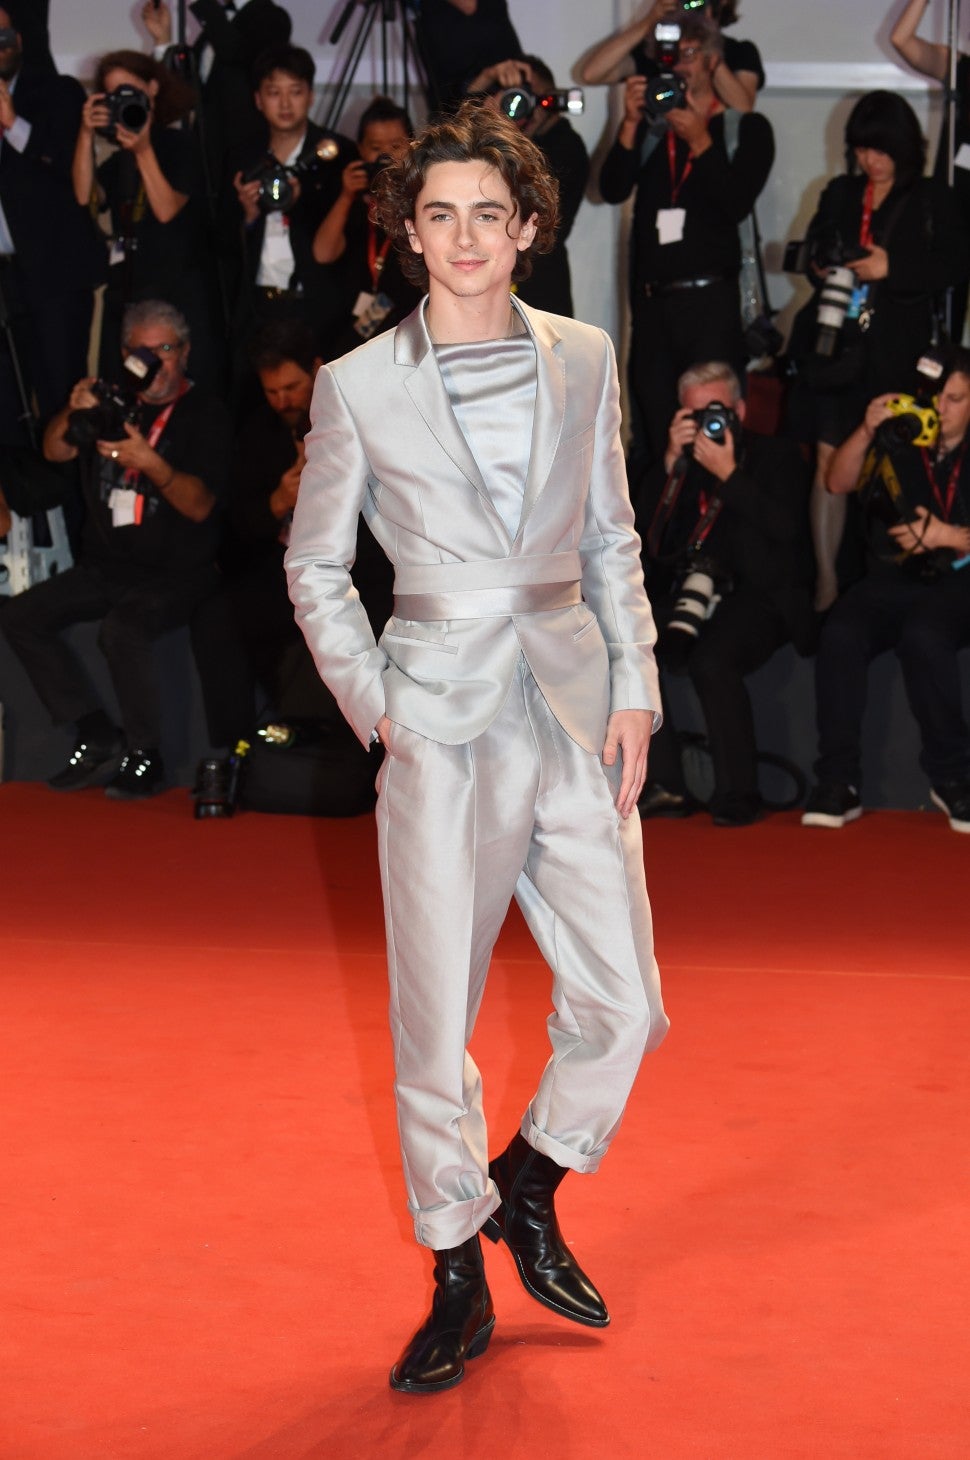 Timothee Chalamet Wins Hearts for the Millionth Time in Silk Gray Suit